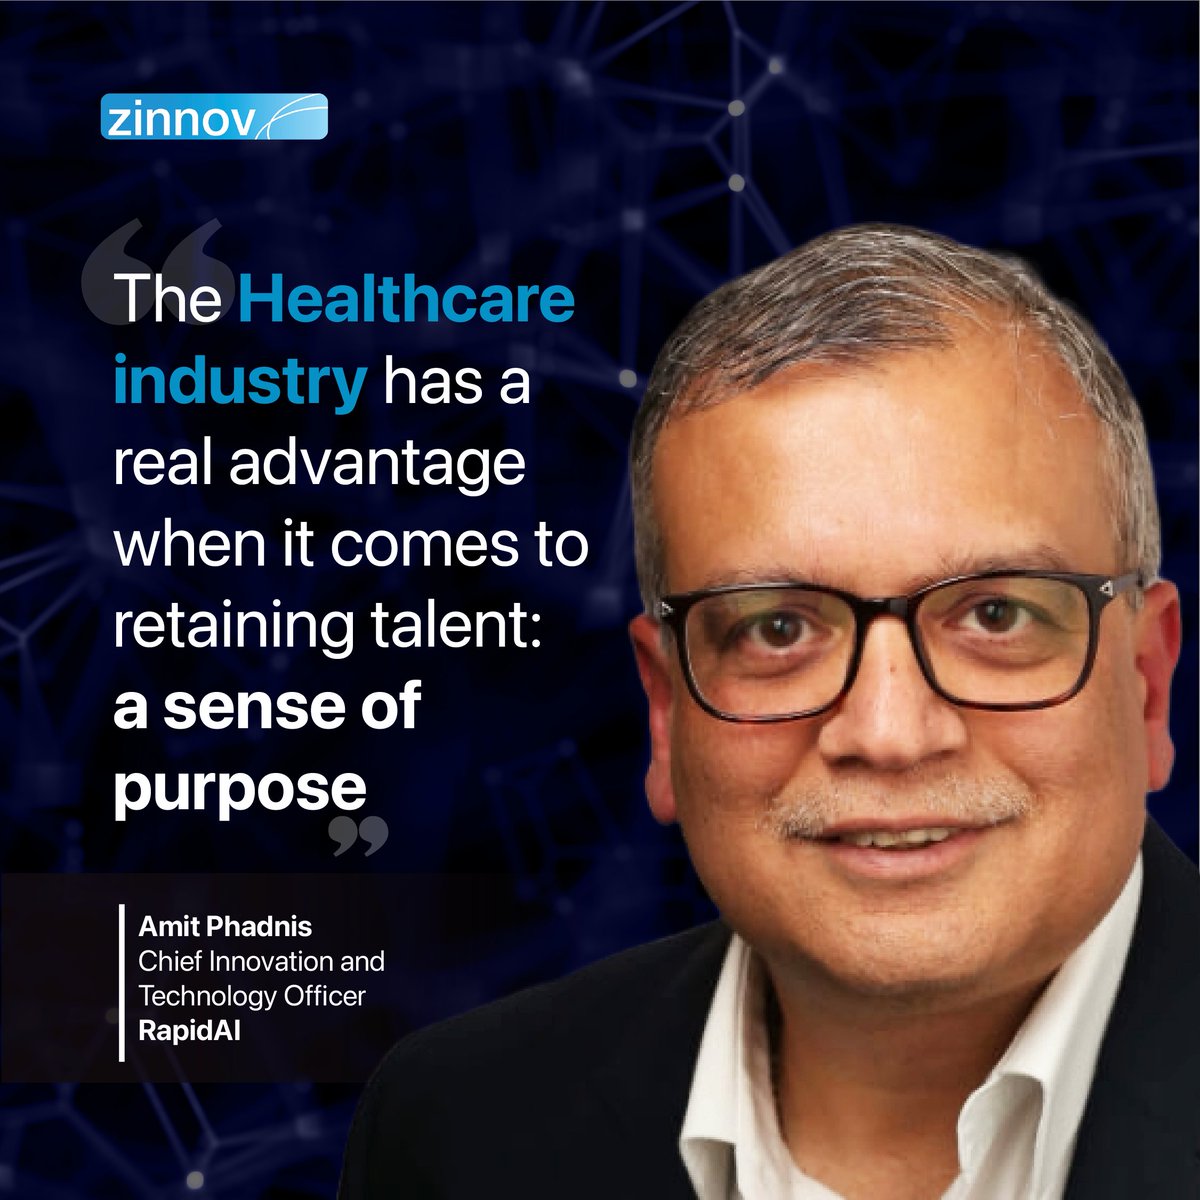 In the recent episode of #Zinnovpodcast, Amit Phadnis, RapidAI, talks to Pari Natarajan, CEO, Zinnov about the promise of #AI and the challenges it brings in terms of accuracy, #Healthcare talent retention strategies, and more. Tune in now: bit.ly/3WfsNnS